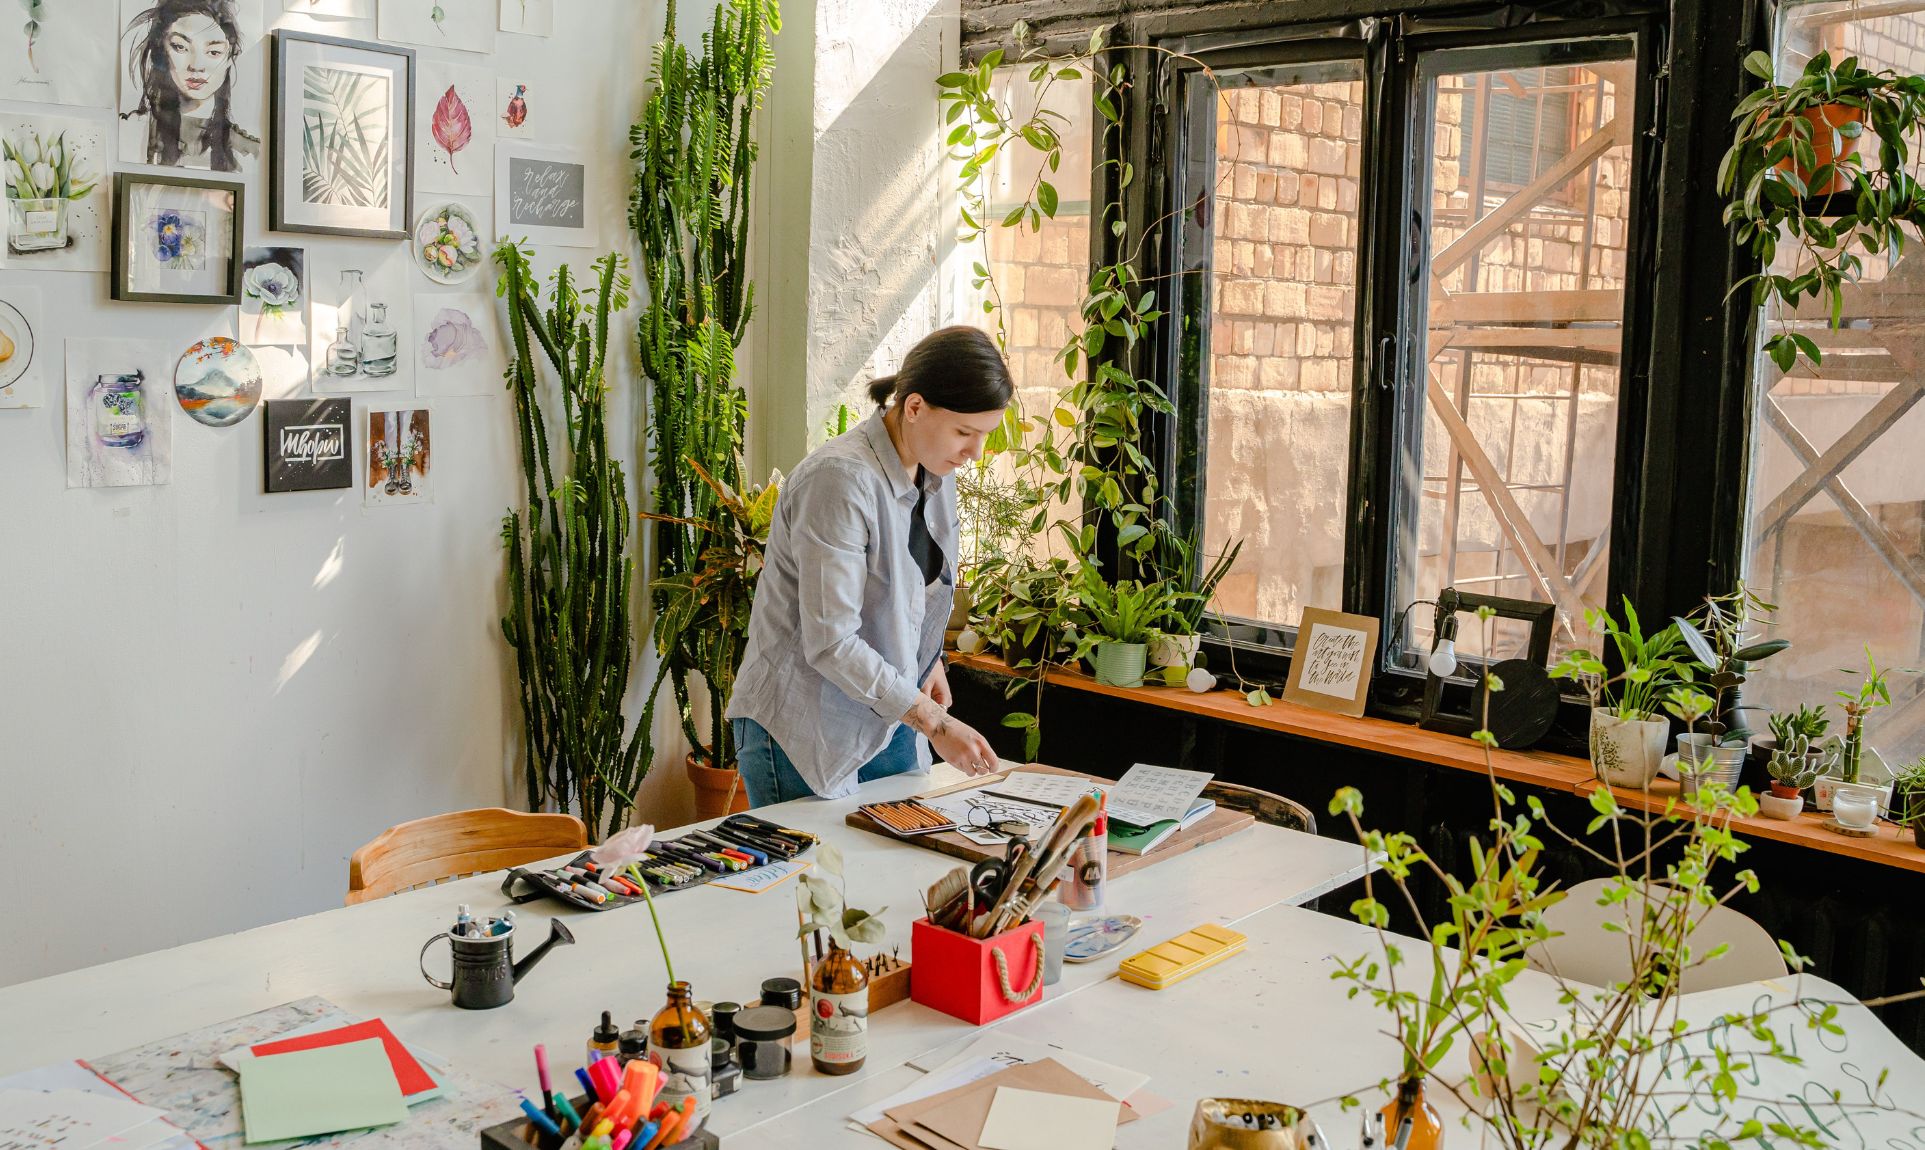 Woman crafting in brightly lit workshop with plants